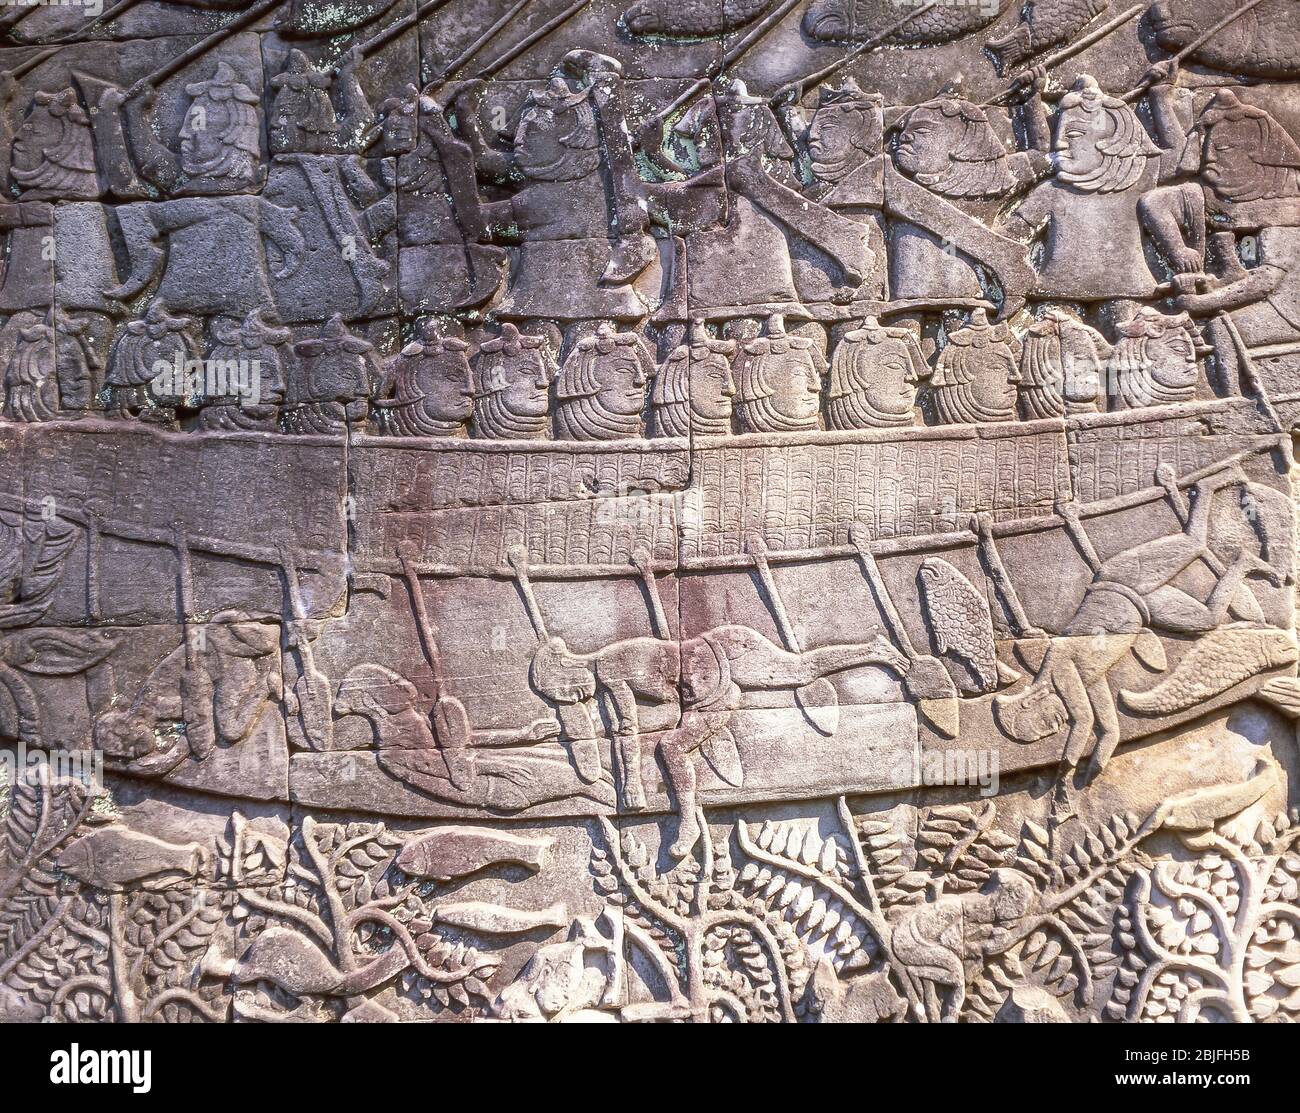 Bas-relief of Cham warriors in a boat during battle, southern gallery, The Bayon Temple, Ankor Thom, Siem Reap, Kingdom of Cambodia Stock Photo